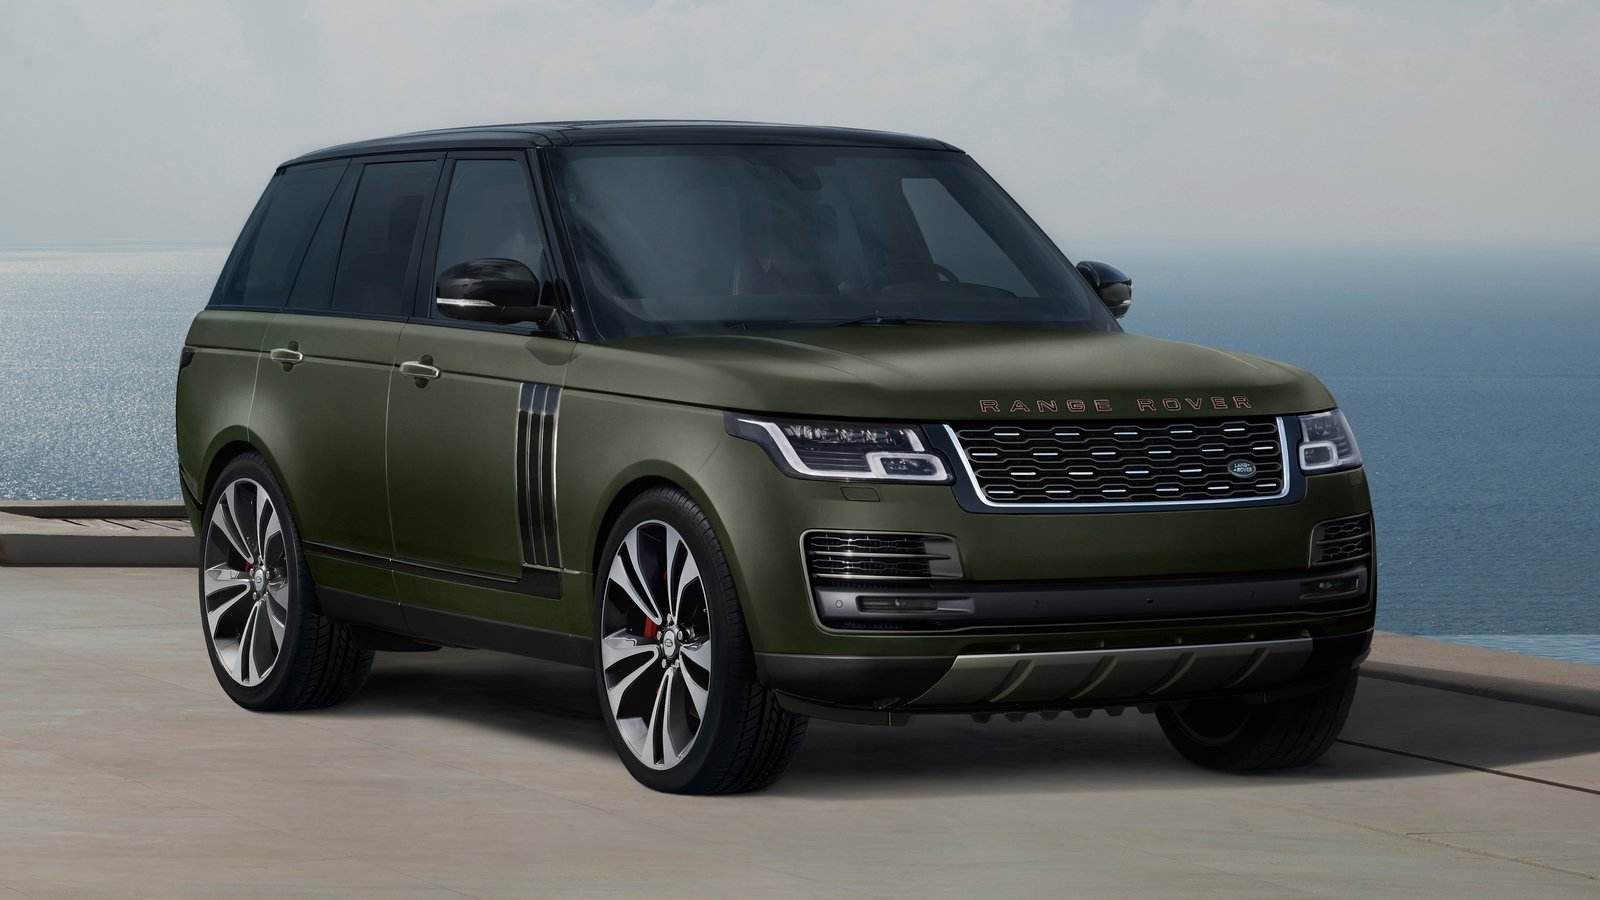 Range Rover SVAutobiography Ultimate editions debut, V8 and hybrid powertrains on offer- Technology News, Gadgetclock